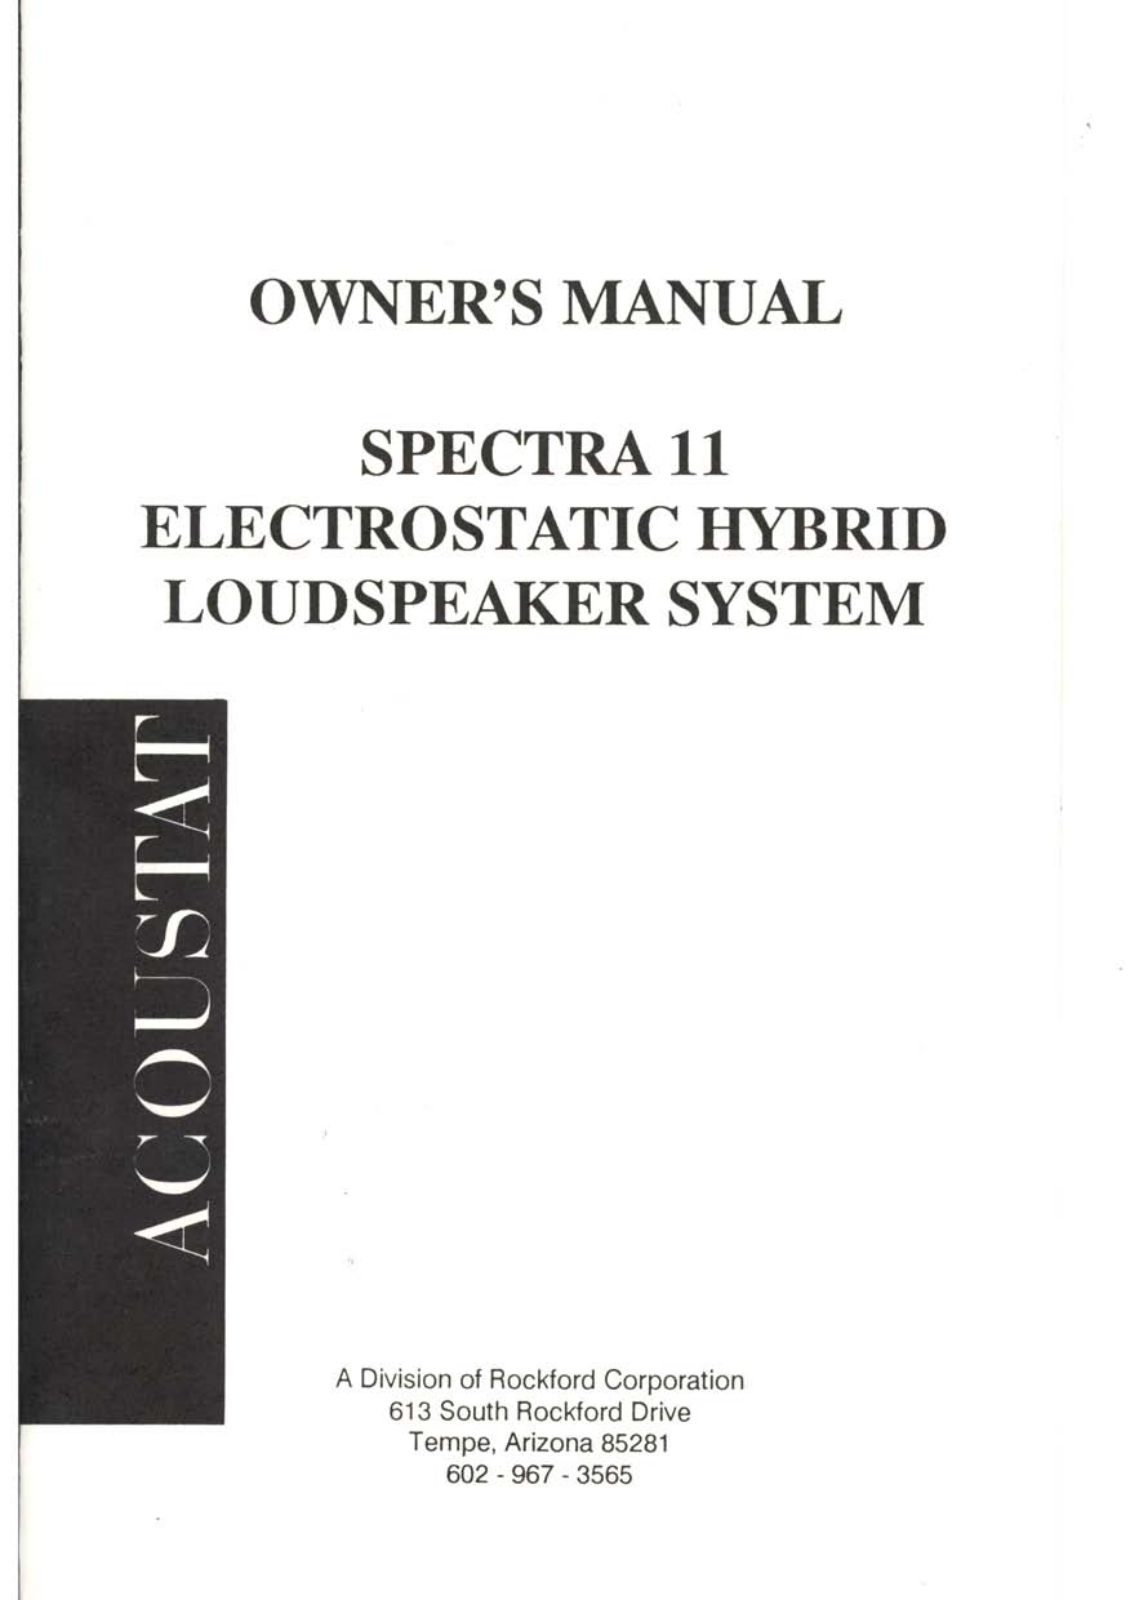 Acoustat Spectra 11 Owners manual